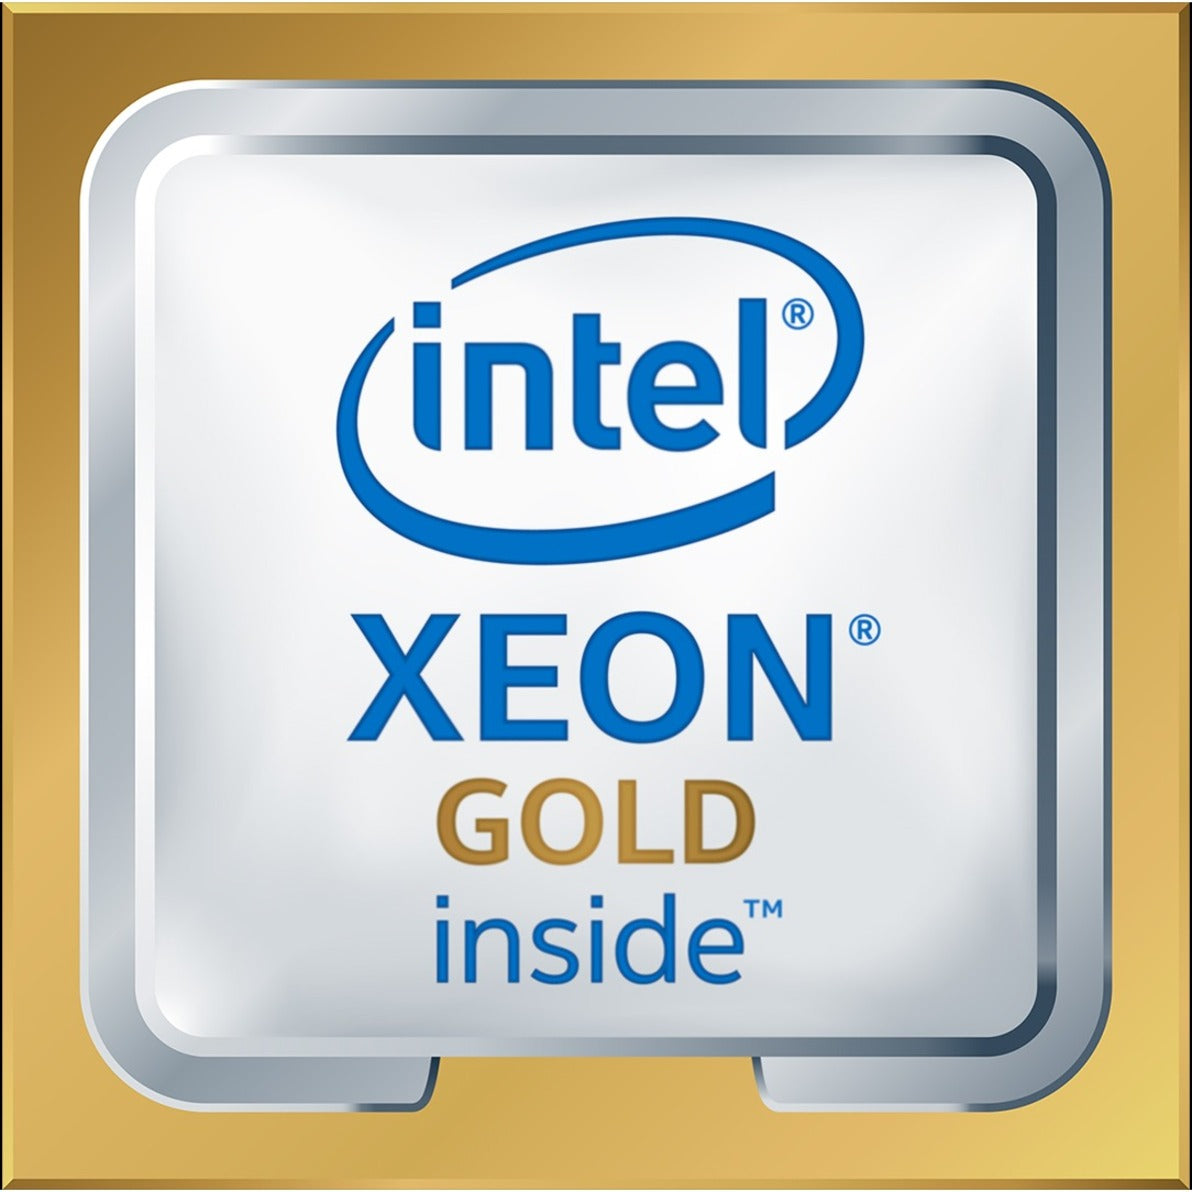 HPE P05684-B21 Xeon Gold 5220 Octadeca-core 2.20 GHz Processor Upgrade, Powerful Performance for HPE ProLiant DL580 Gen10 Server [Discontinued]